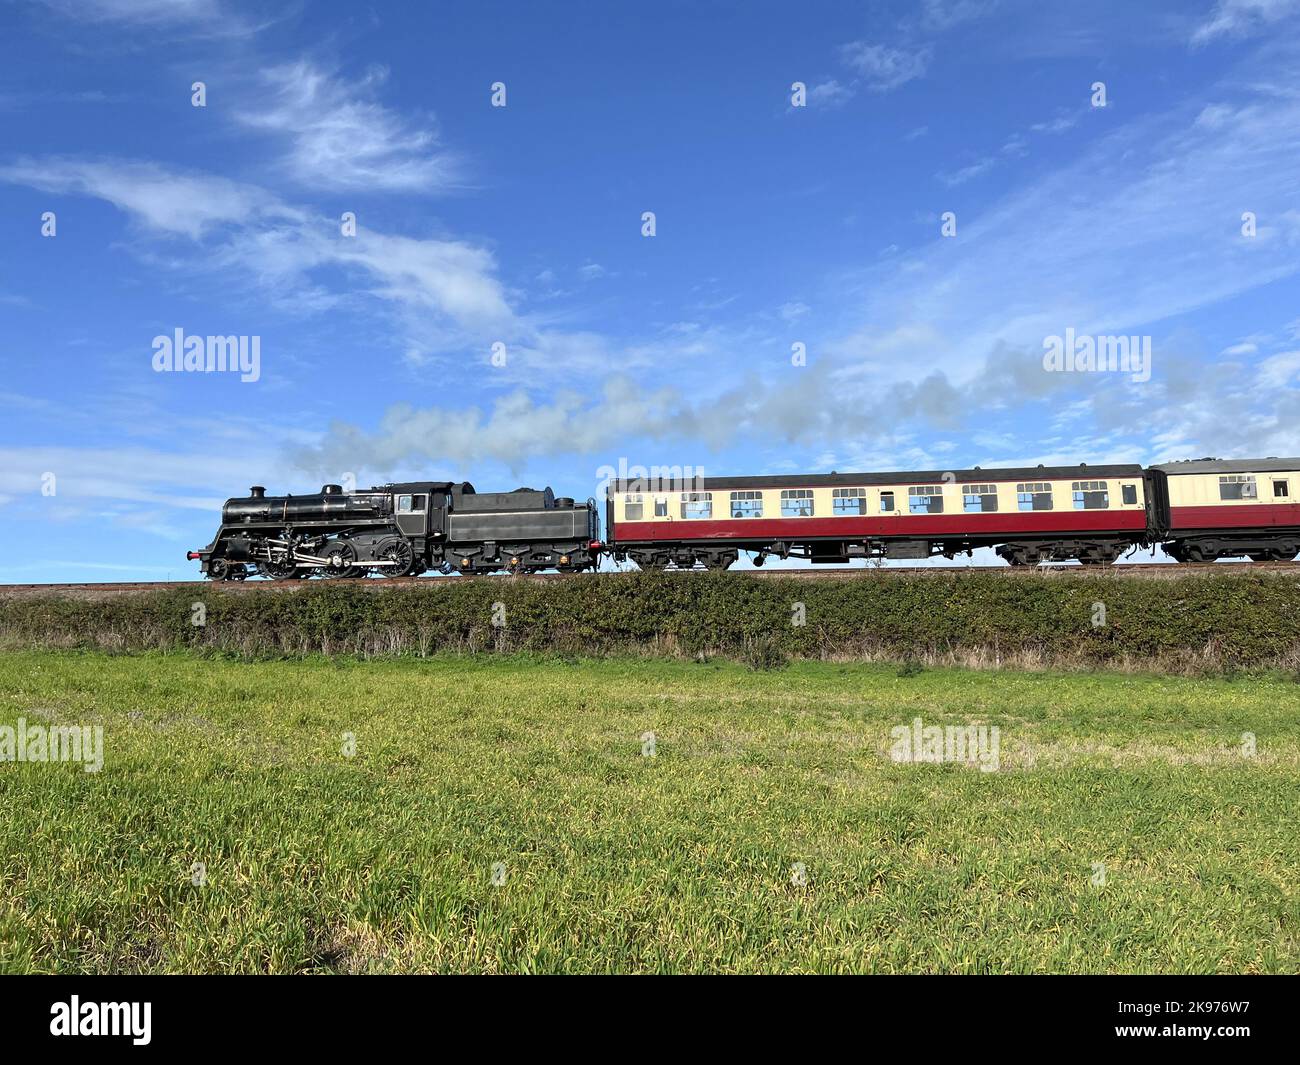 A steam train travelling through open countryside Stock Photo